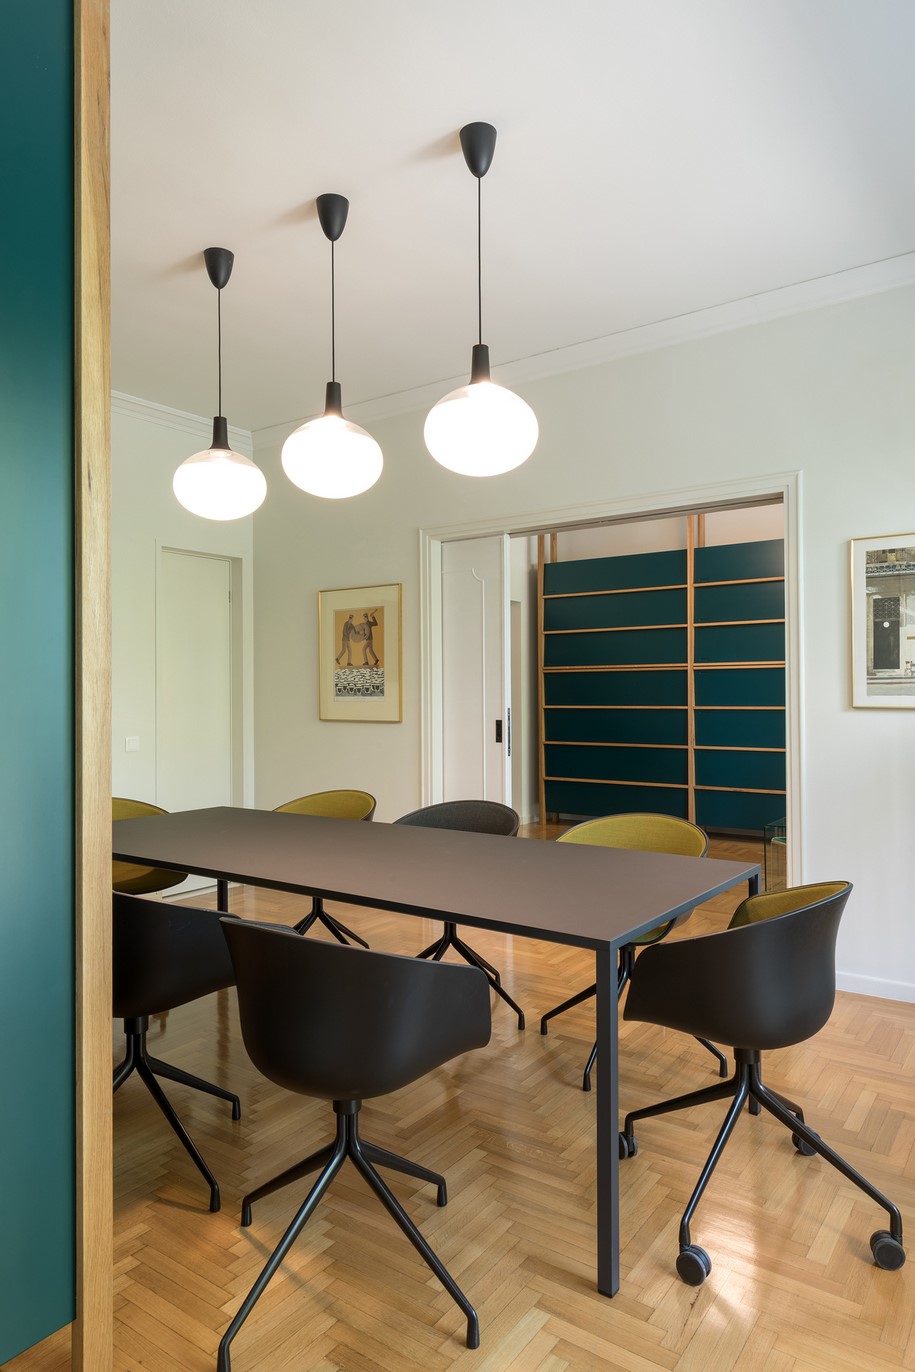 Archisearch Area converted a 1950’s residential apartment into Homeoffice